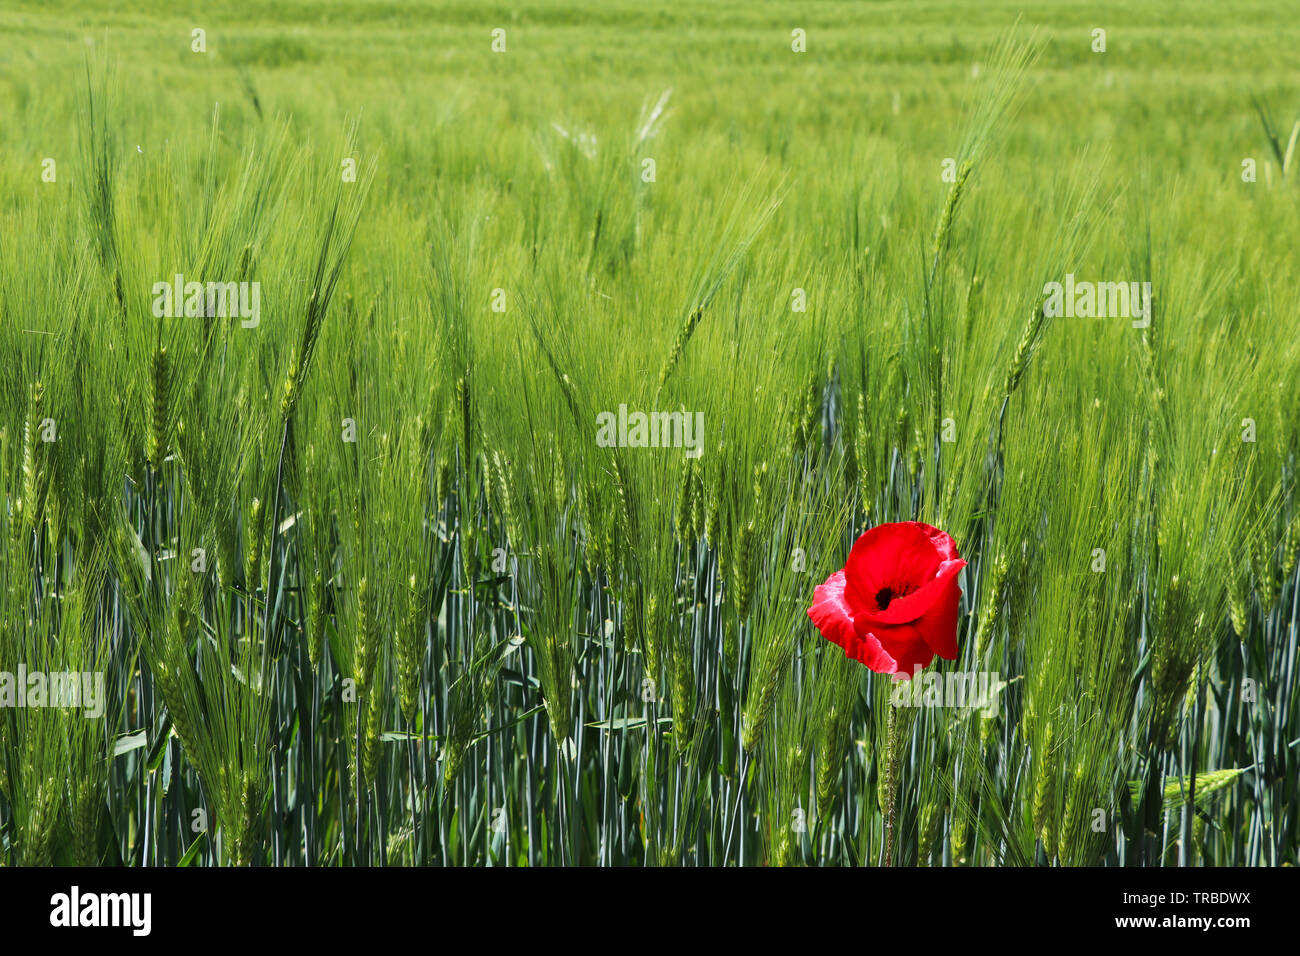 Red poppy flower or Papaver rhoeas in front of green field of rye or Secale cereale Stock Photo